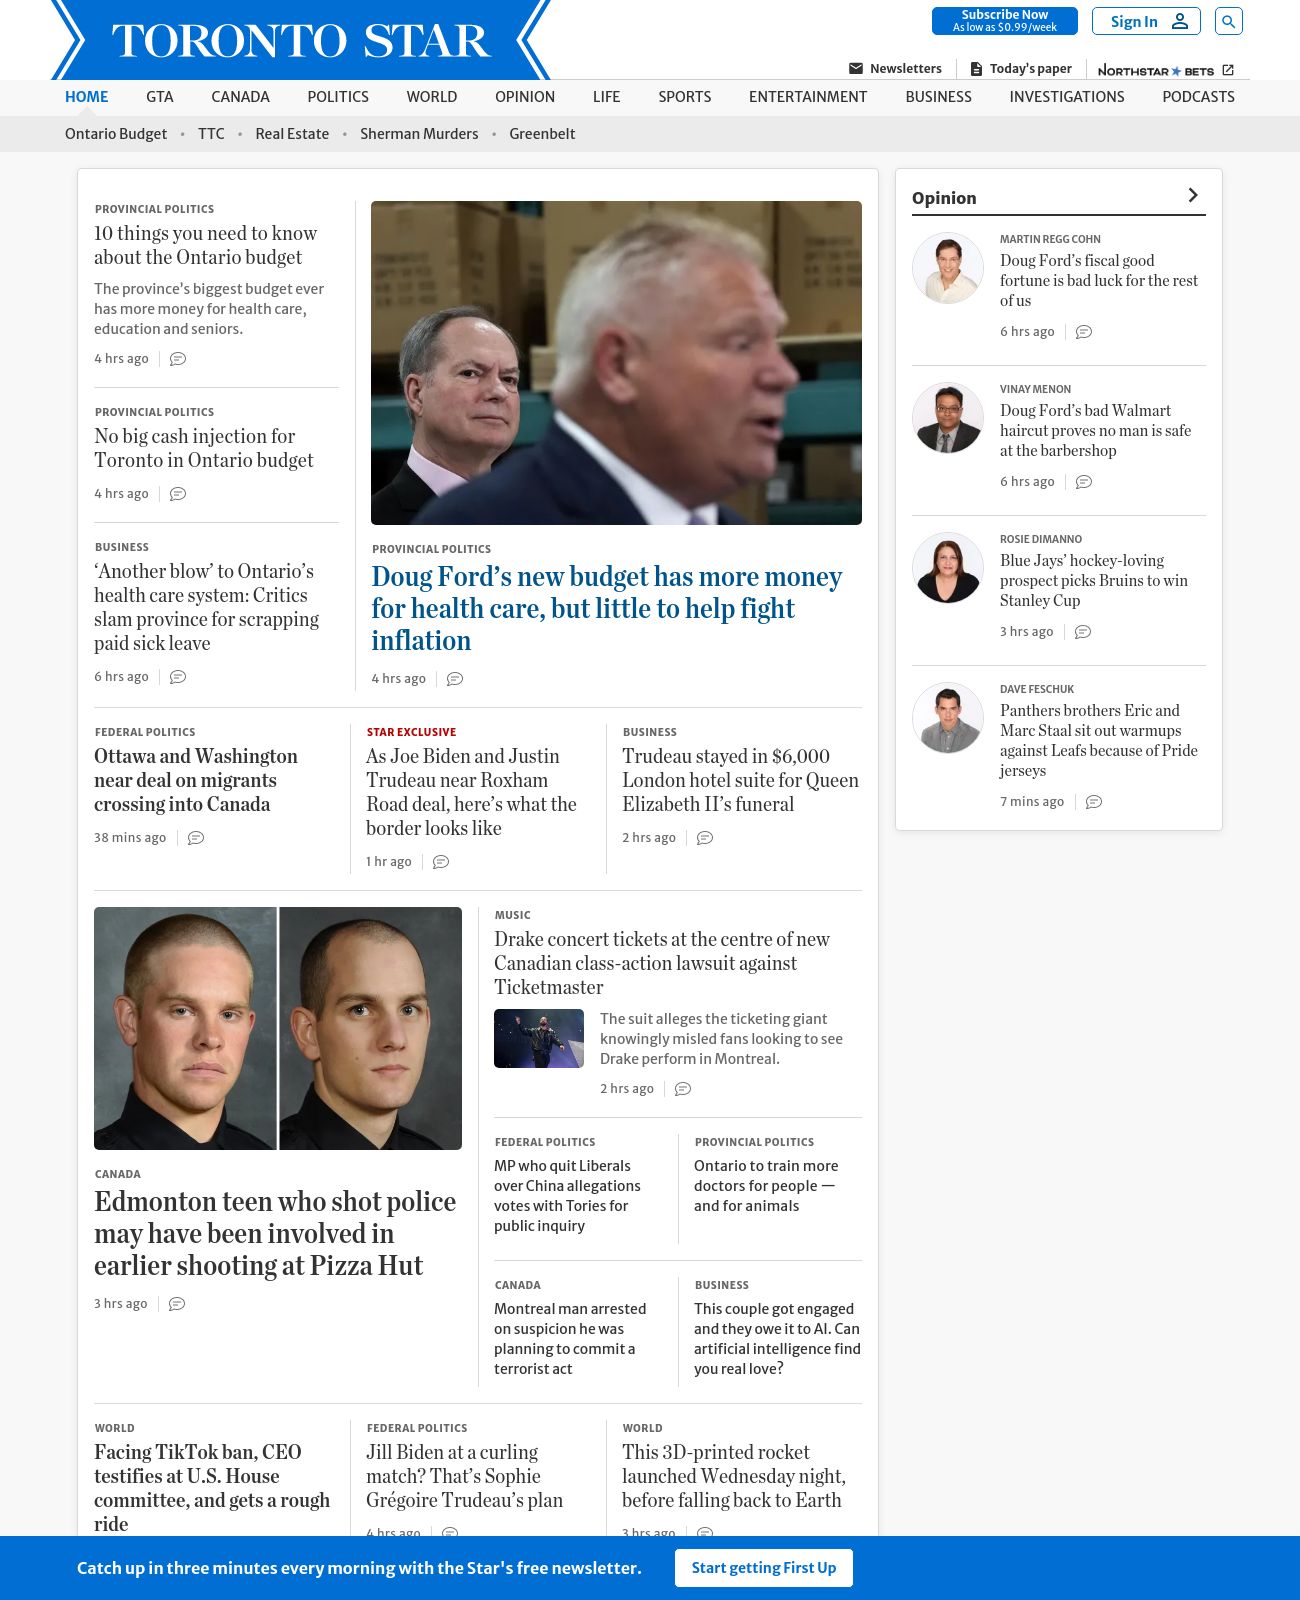 Toronto Star at 2023-03-23 23:03:16-04:00 local time